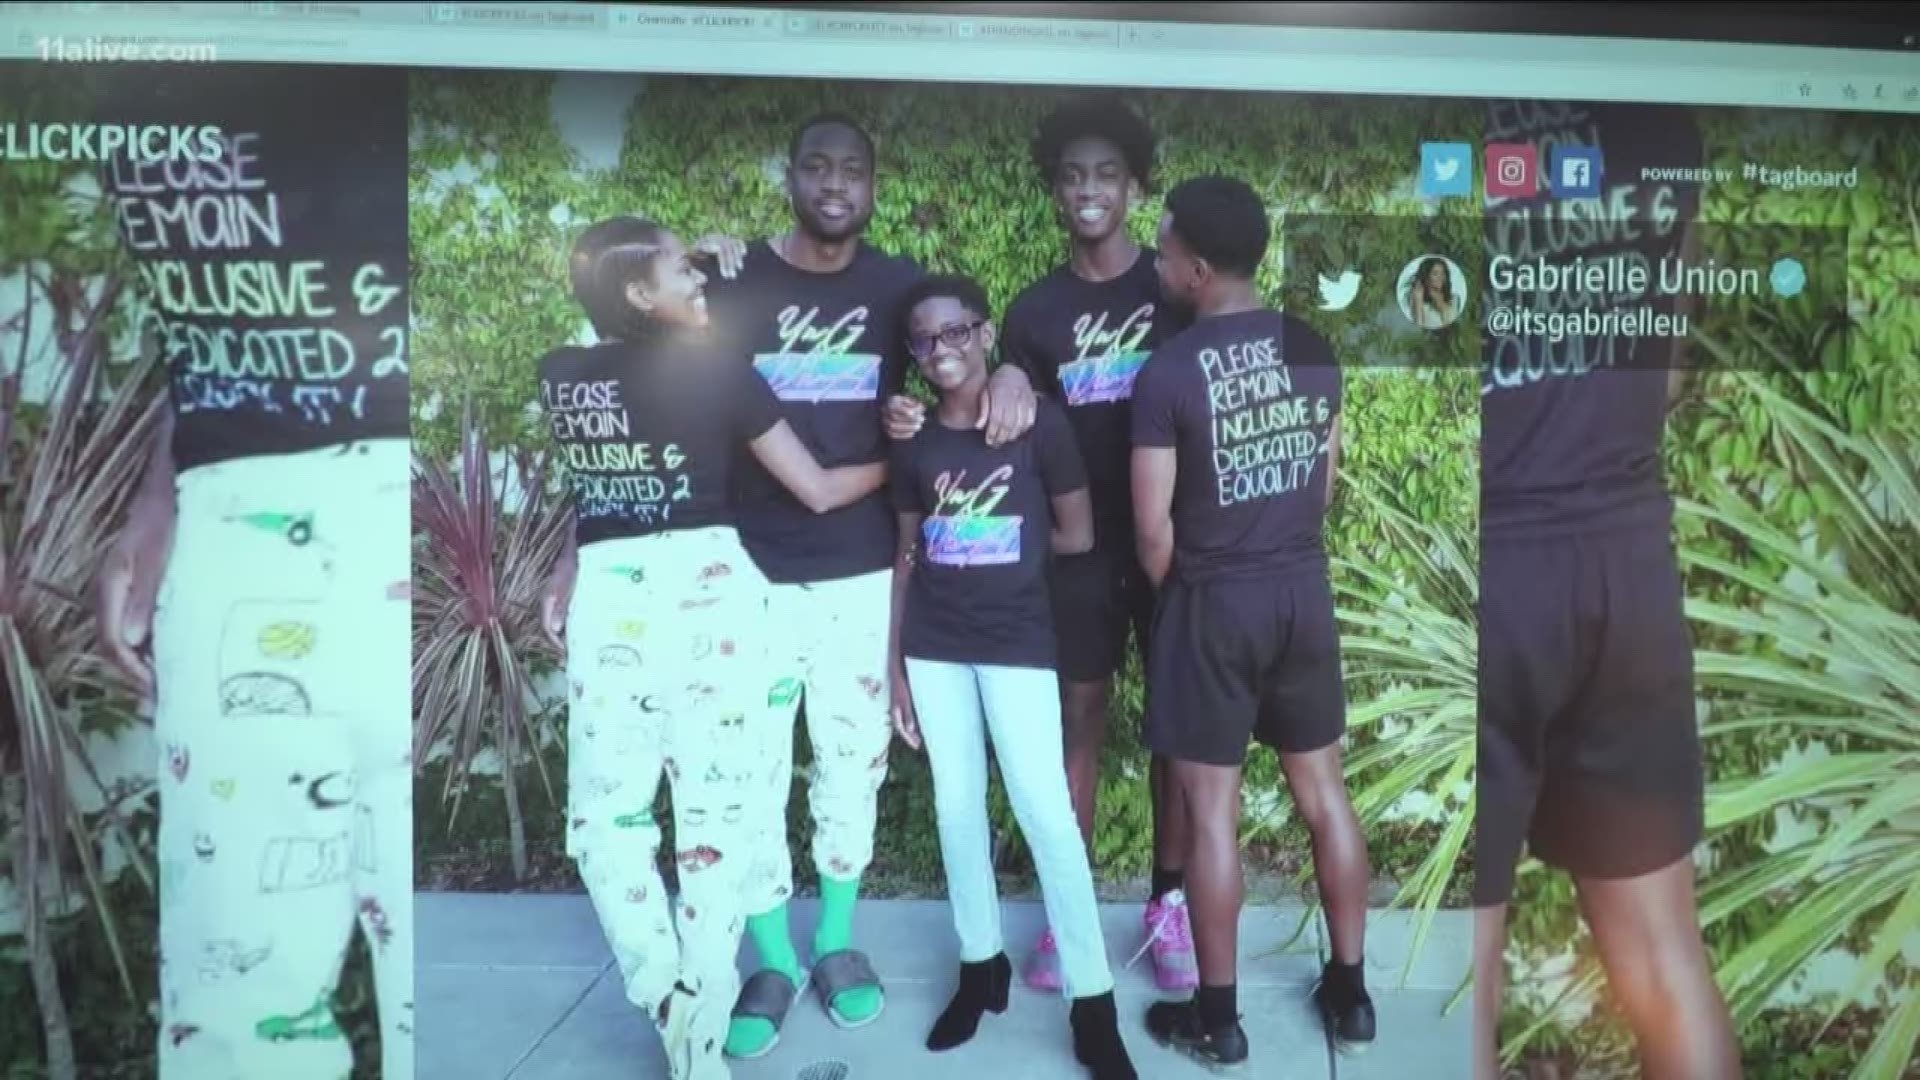 The Wade family and @yngdna have decided to donate $50k and 50% of the proceeds of sales of the Pride shirts to The GLSEN organization whose mission strives to ensure safe schools for all students, regardless of sexual orientation as well as gender identity, Union wrote on her Instagram.